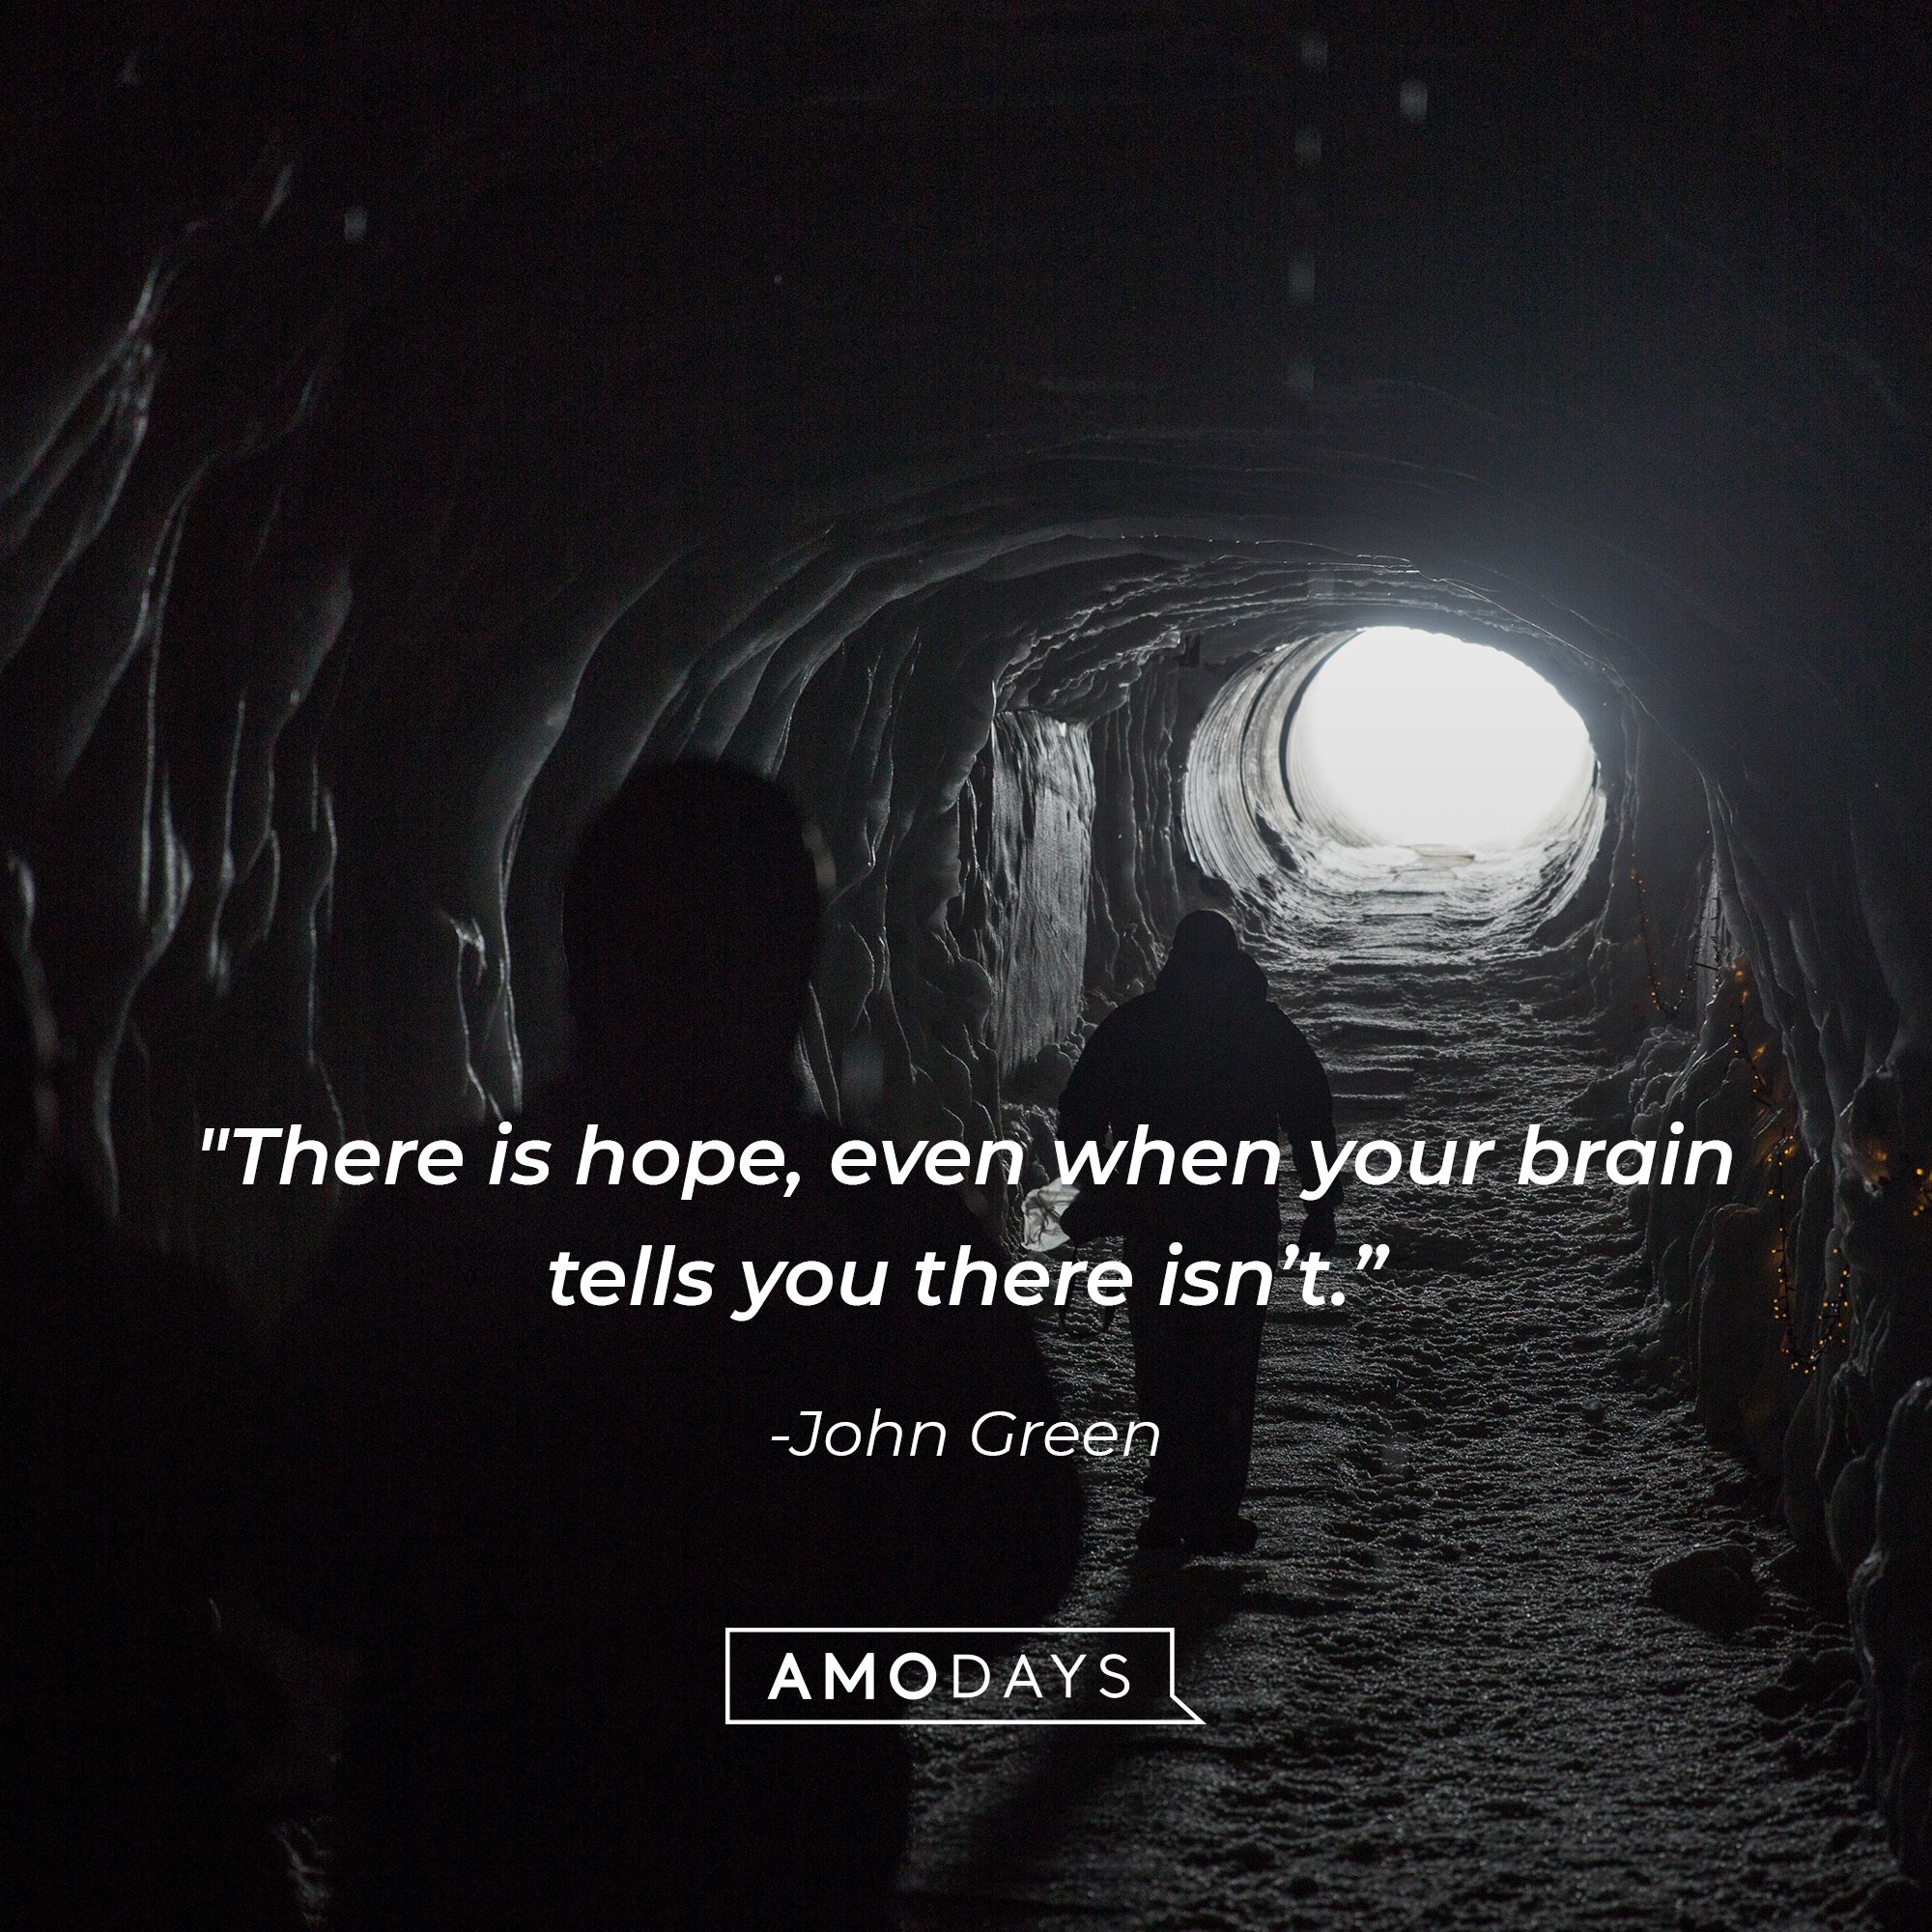 John Green's quote: "There is hope, even when your brain tells you there isn’t.” | Image: AmoDays